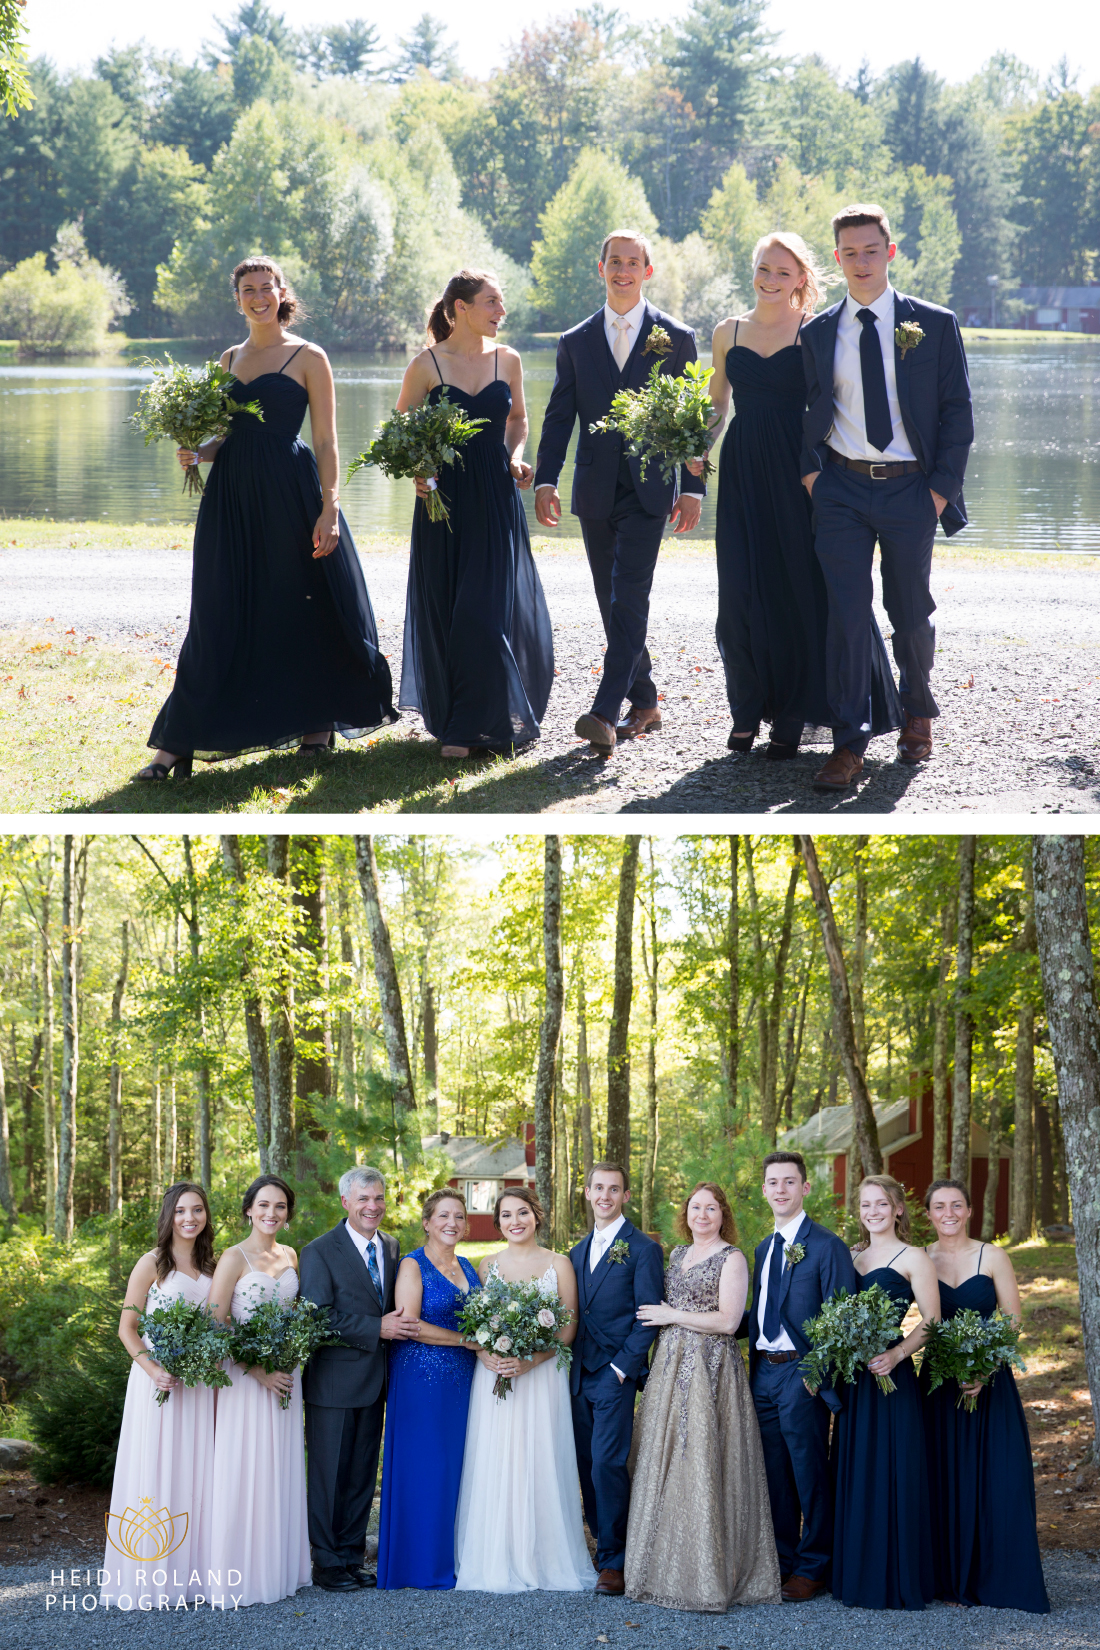 family photos on wedding day in nature